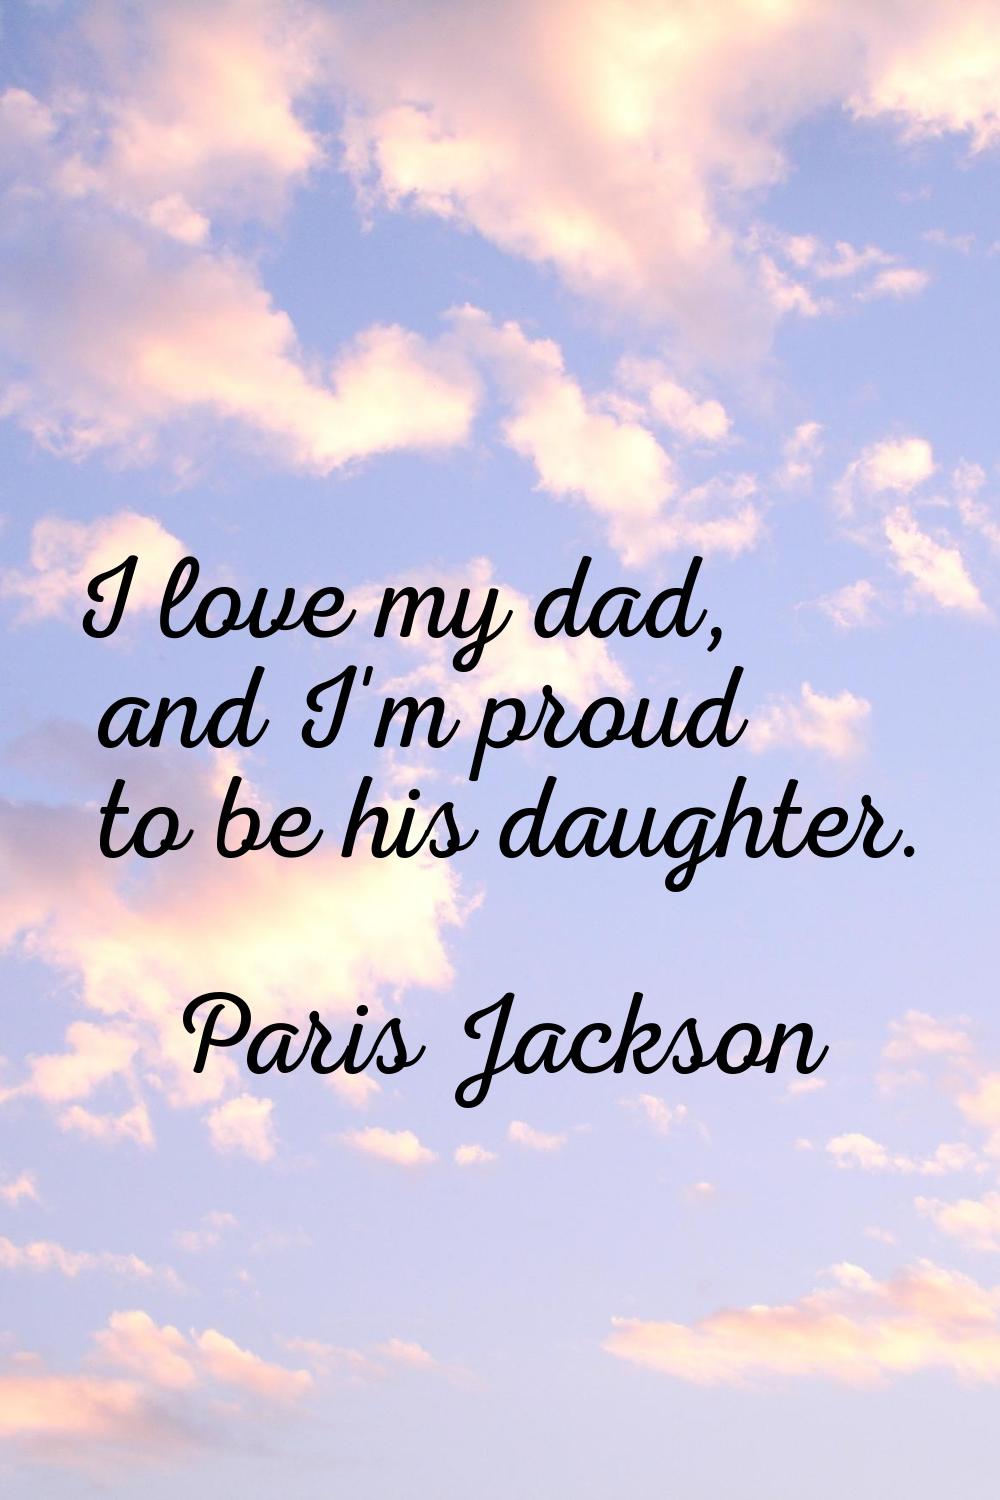 I love my dad, and I'm proud to be his daughter.